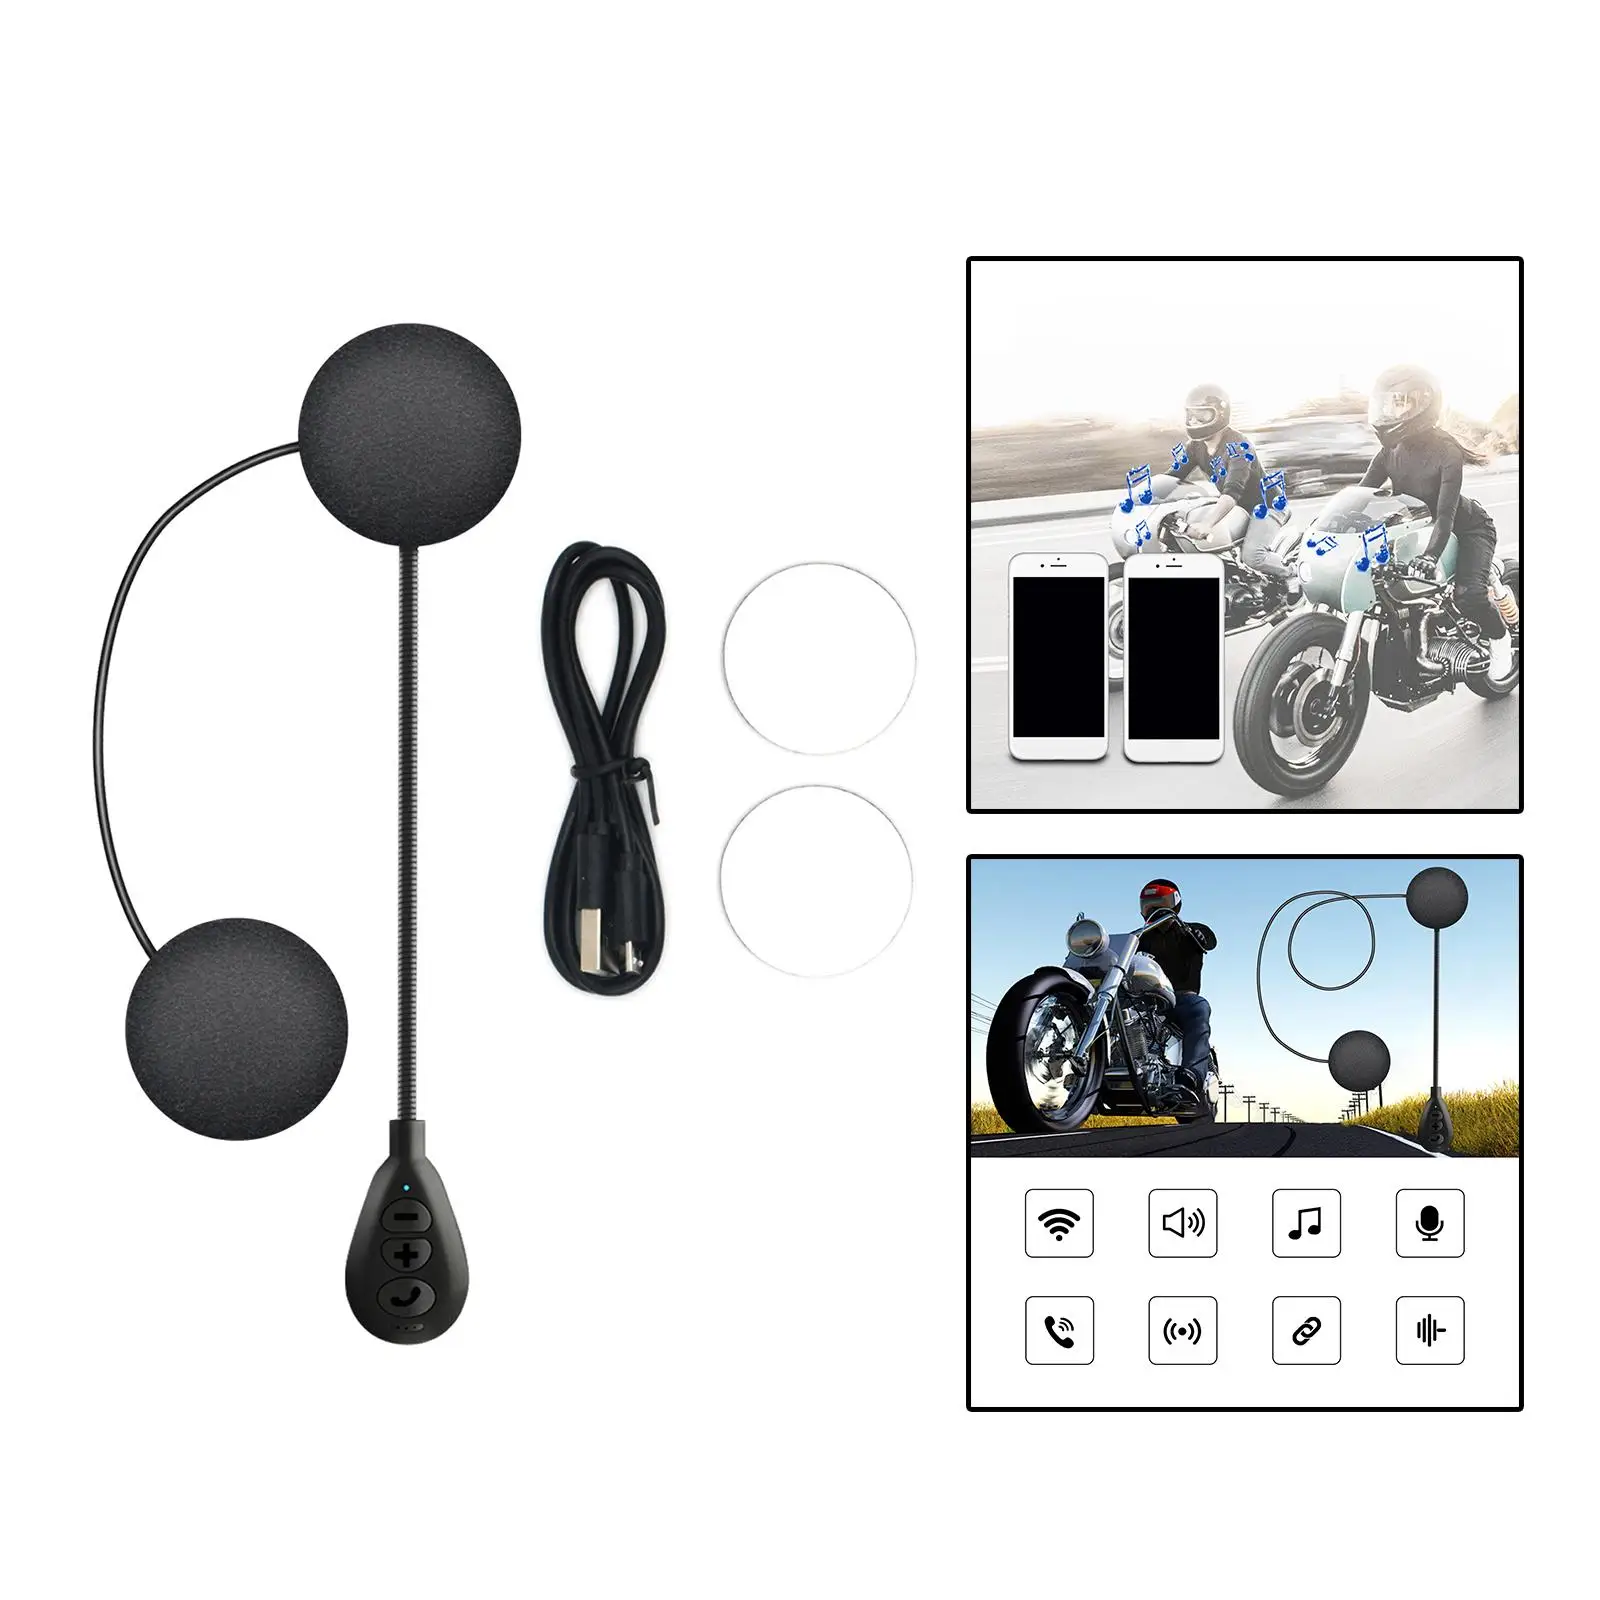 Motorcycle Bluetooth Helmet Headset Automatic Answering Stereo Volume Control Headphone for Express Delivery Outdoor Sports